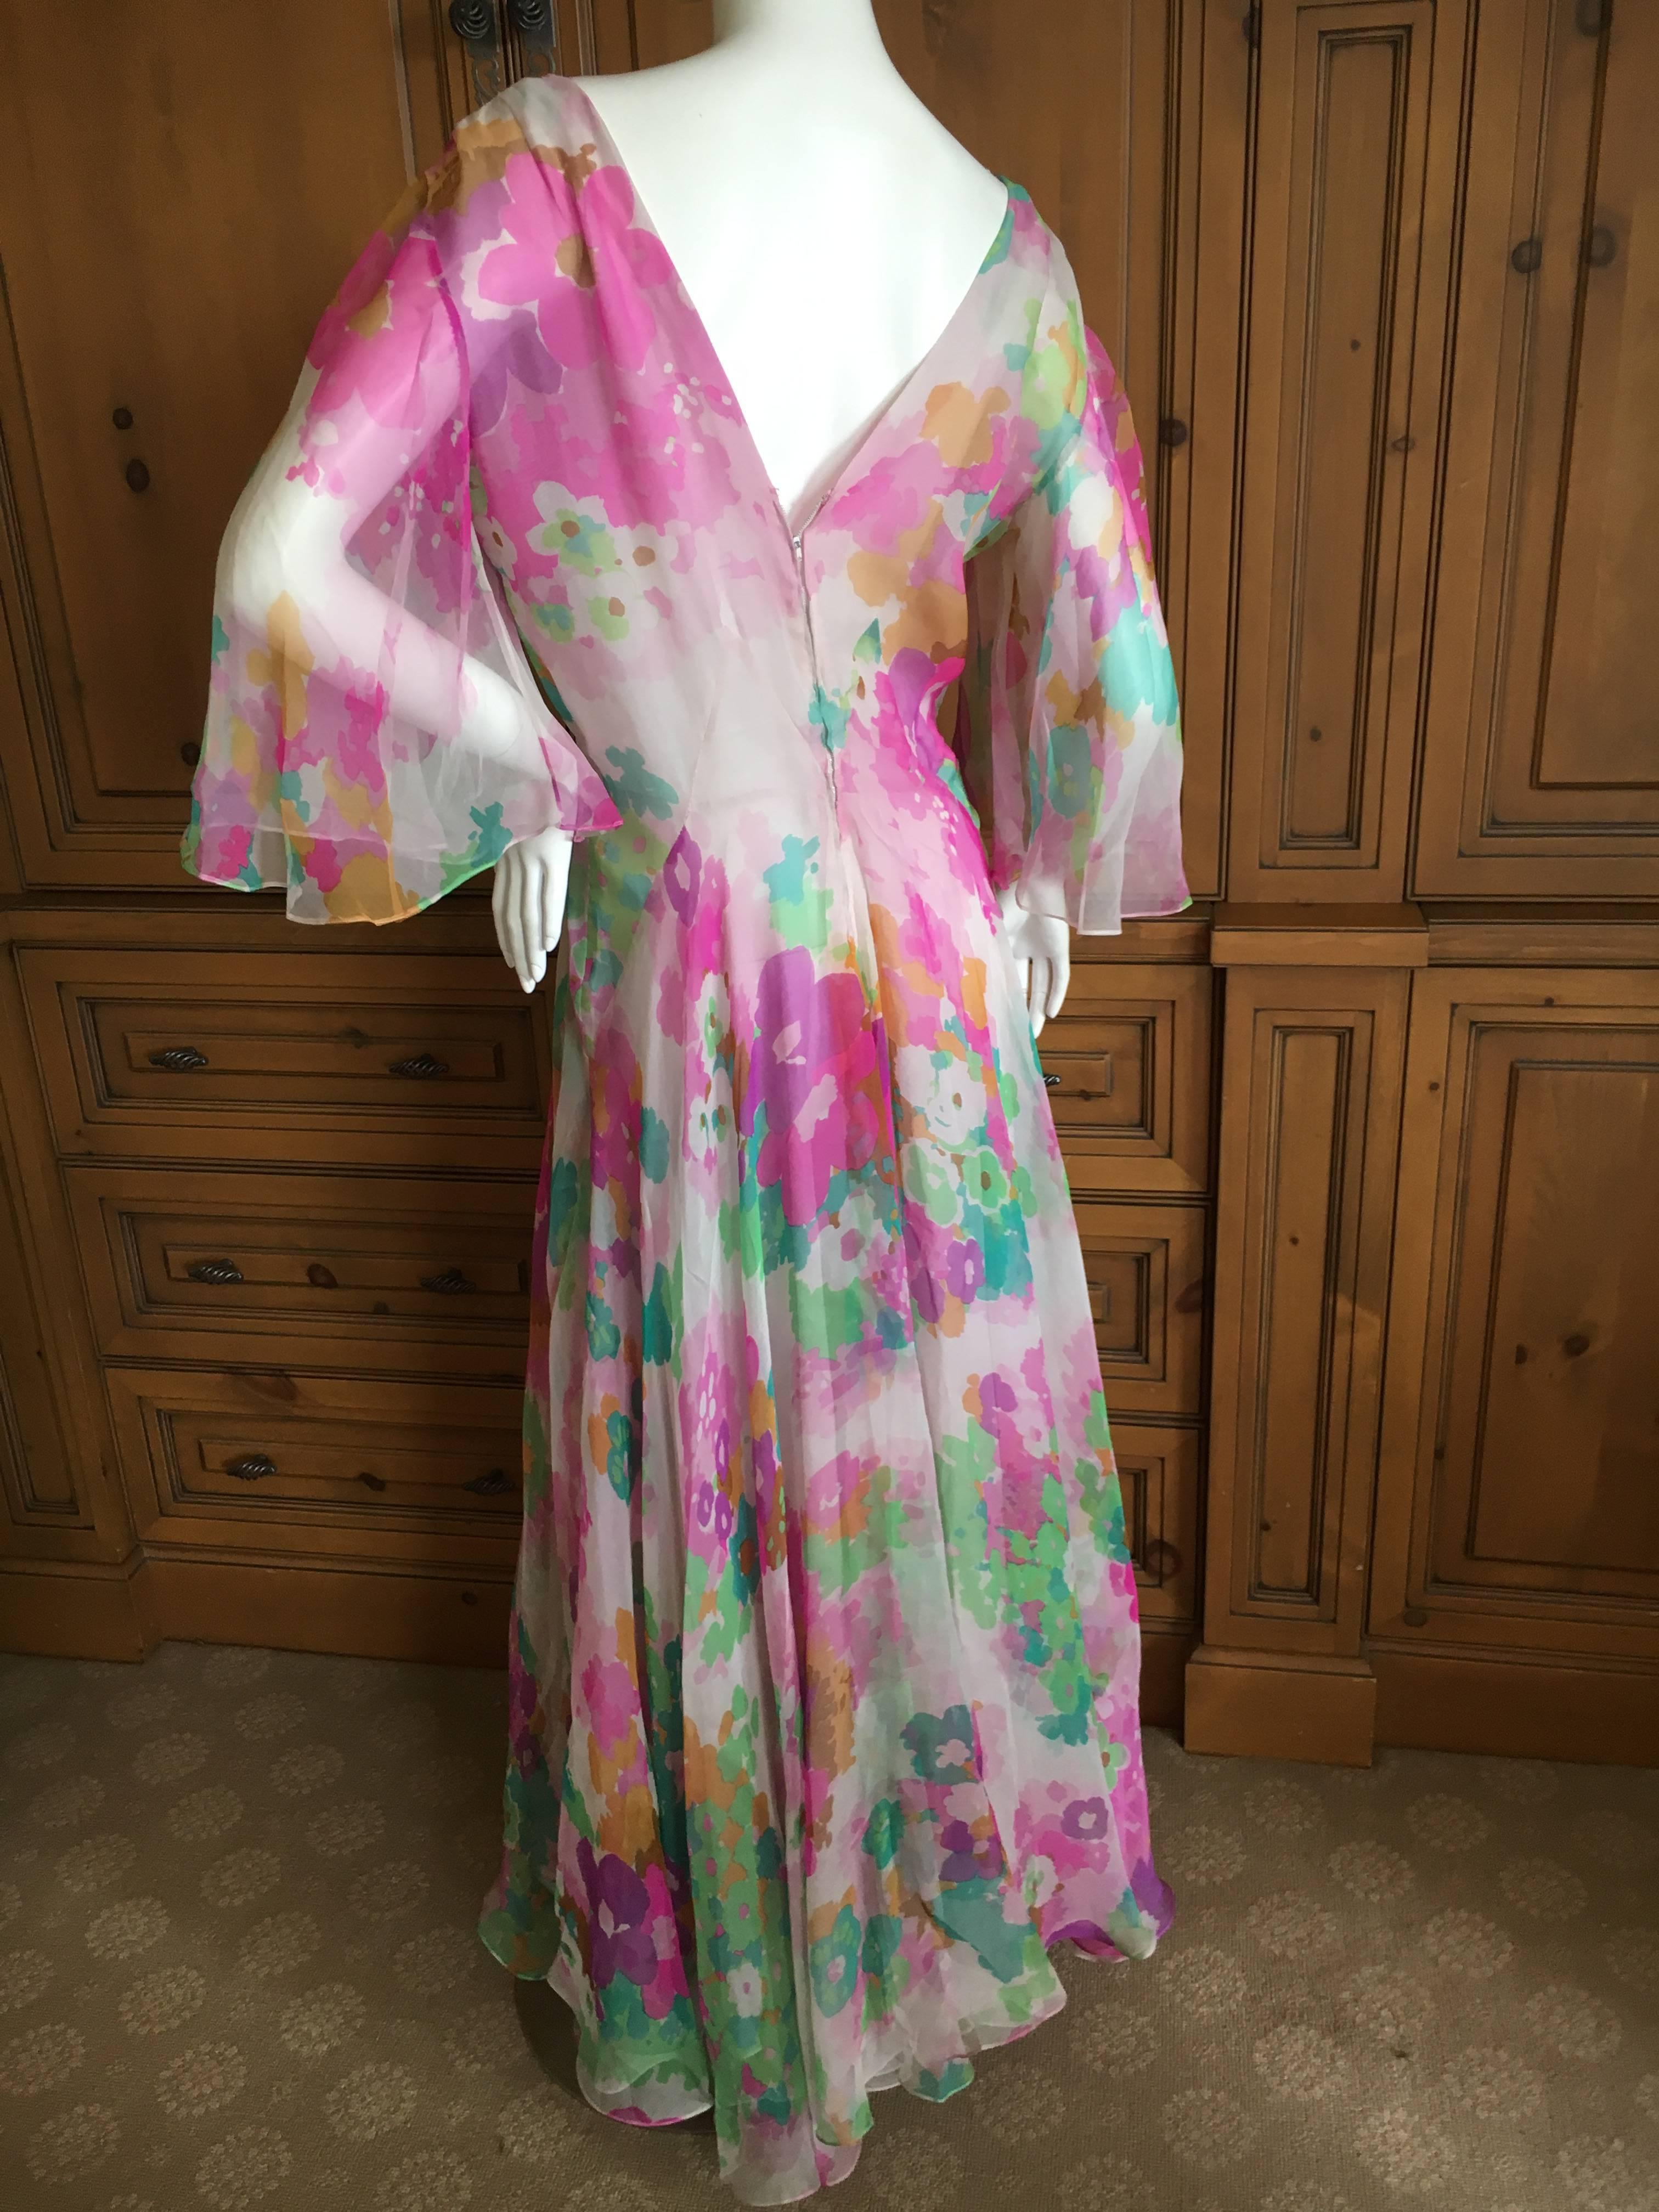 Romantic silk chiffon floral dress from Marc Bohan for Christian Dior.
Cut on the bias, with etherial bell sleeves, it flows beautifully when worn.
The label is numbered, it is demi haute couture.
Bust 40